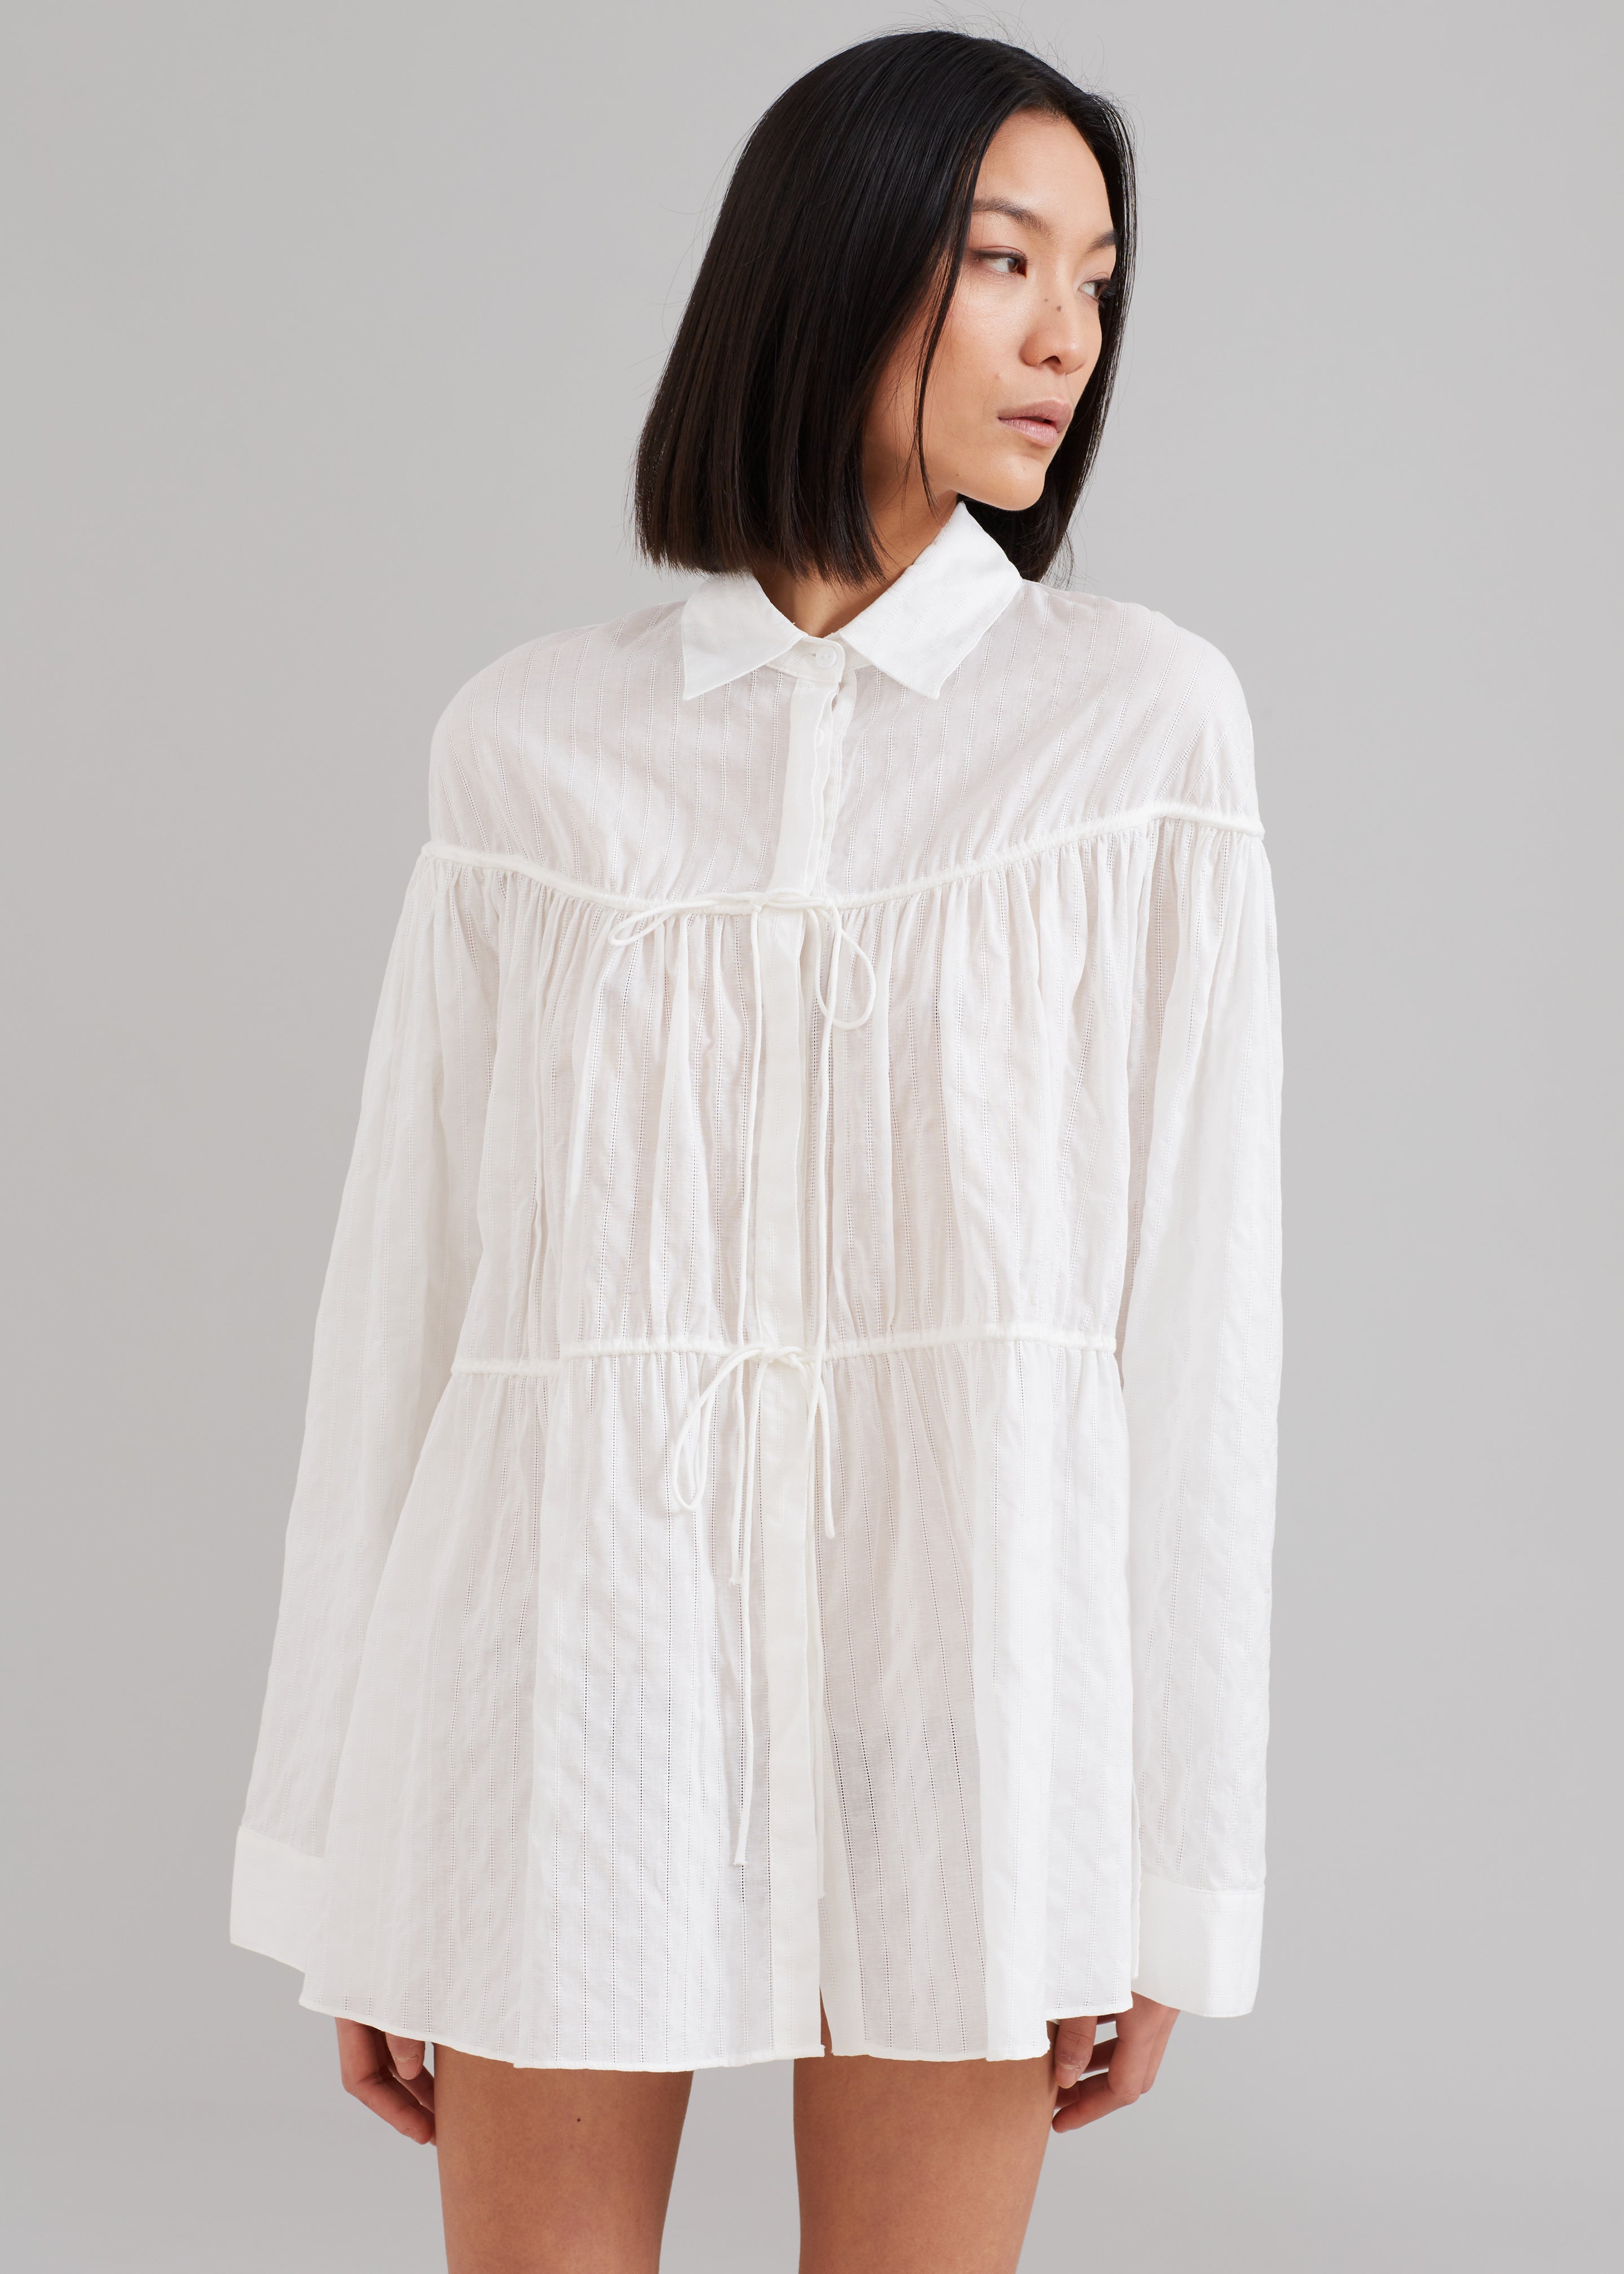 Matteau Embroidered Drawcord Tunic - White - 6